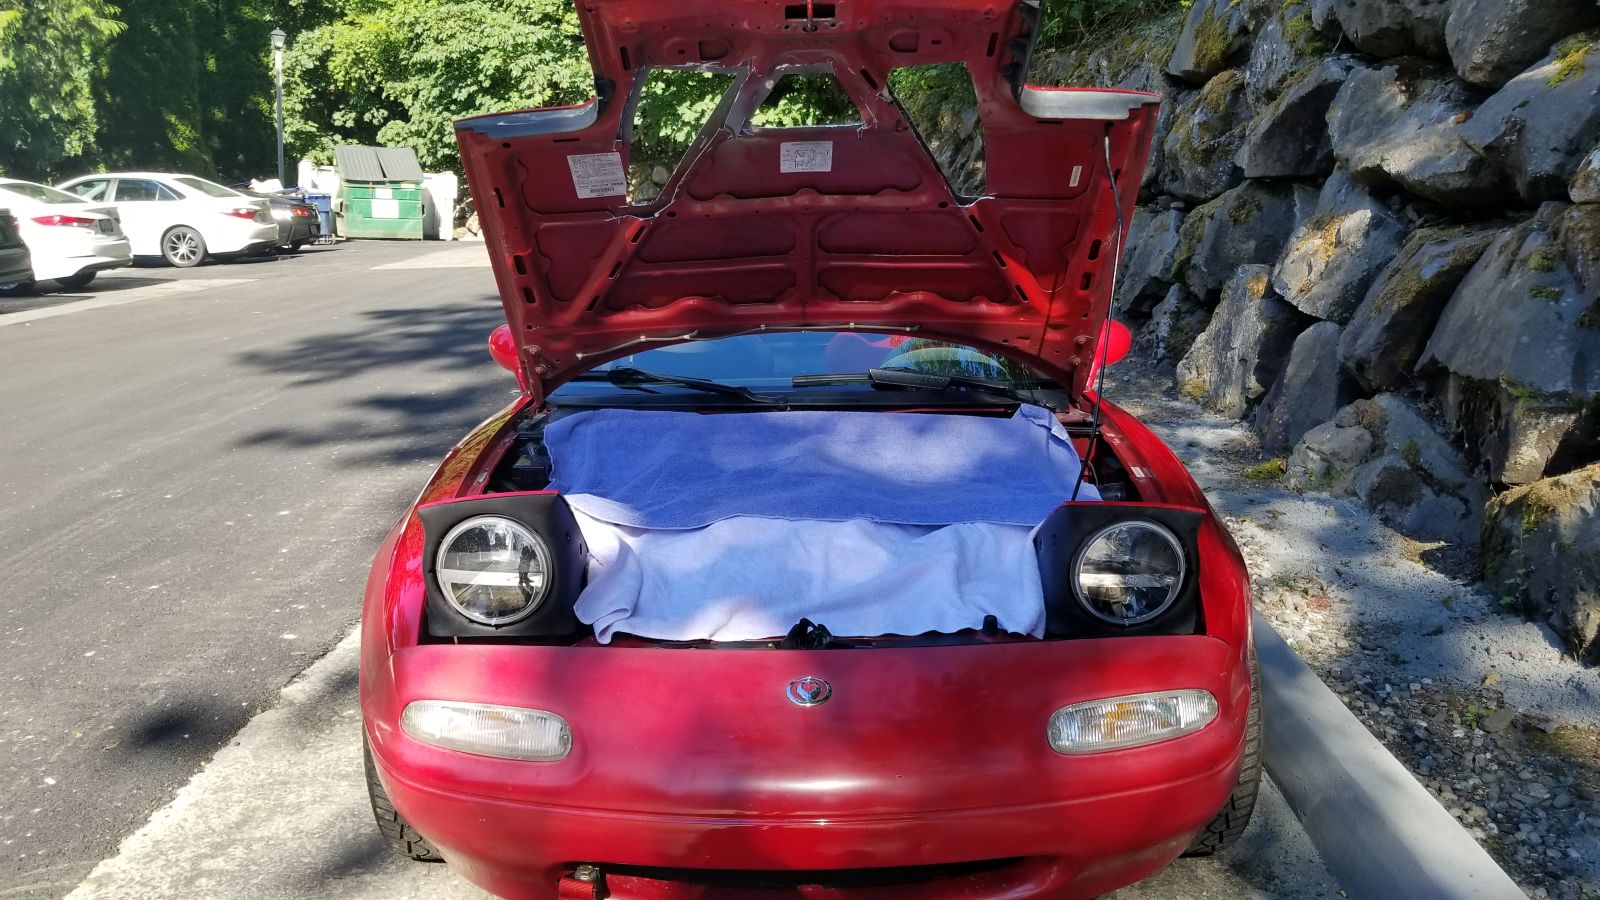 Doing the final underhood trimming took another 2 hours